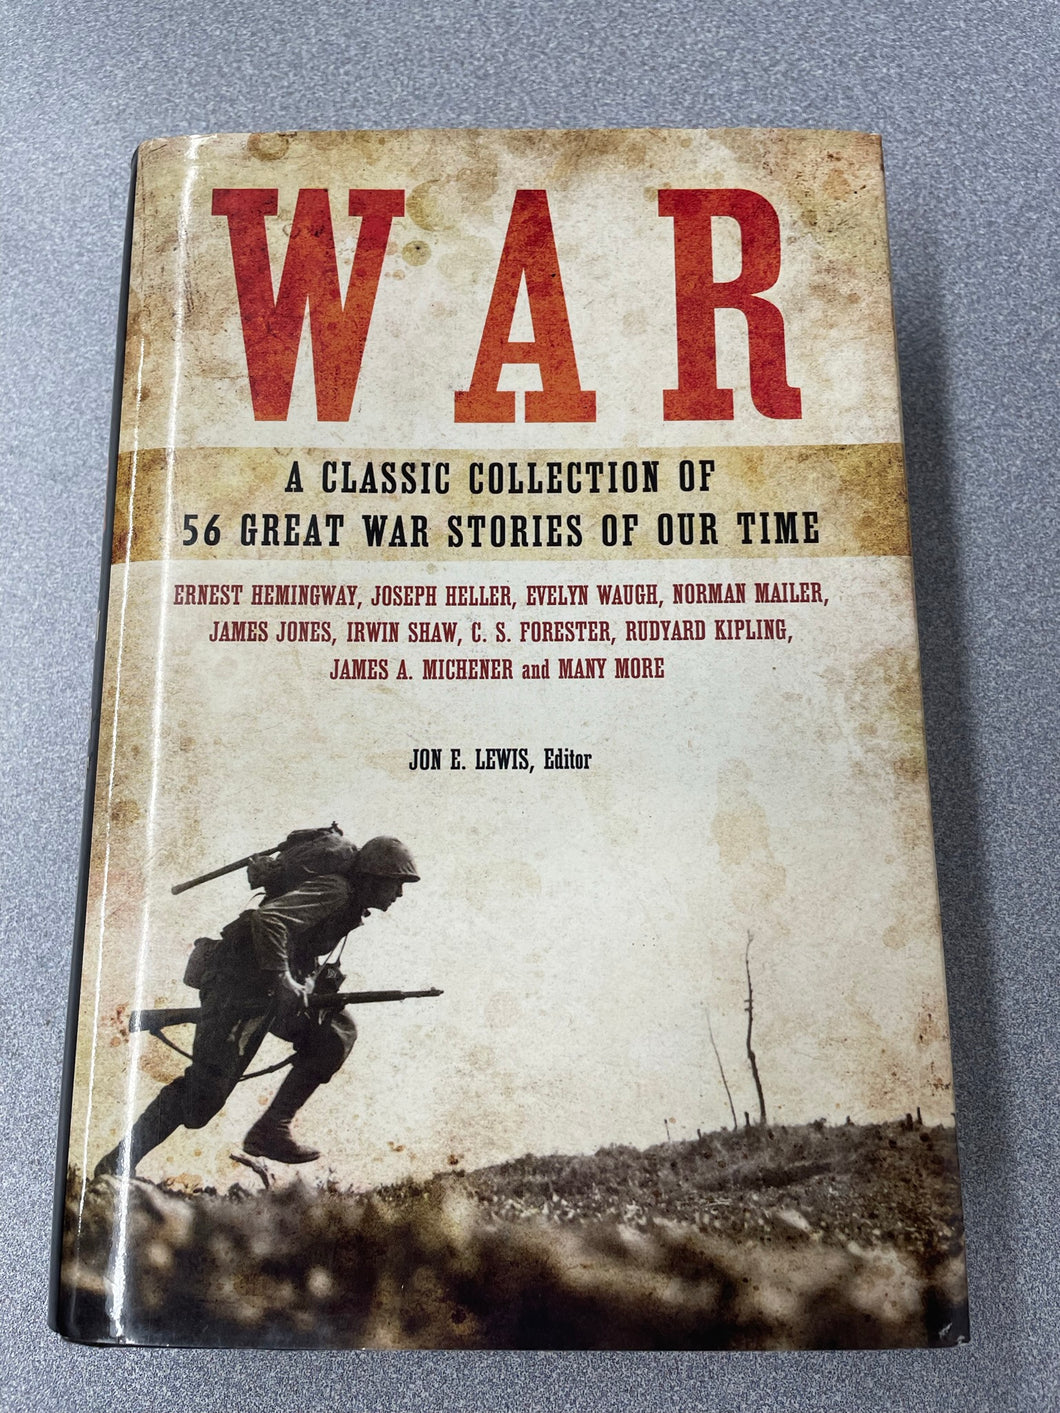 War: A Classic Collection of 56 Great War Stories of Our Time, Lewis, Jon E., ed. [1993] ML 9/23